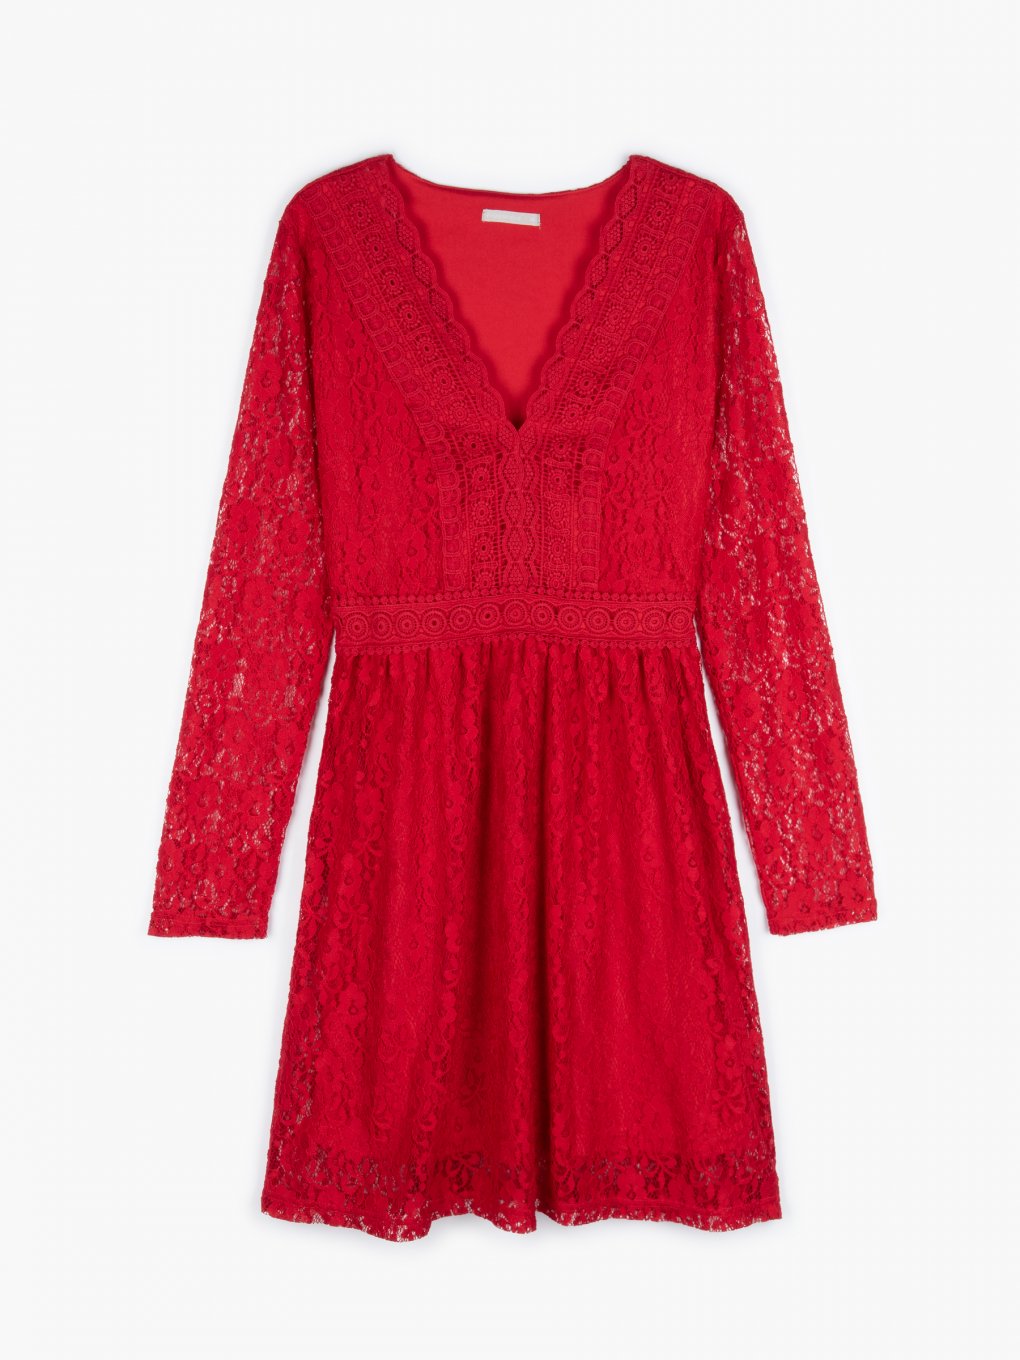 Lace a-line v-neck dress with long sleeve